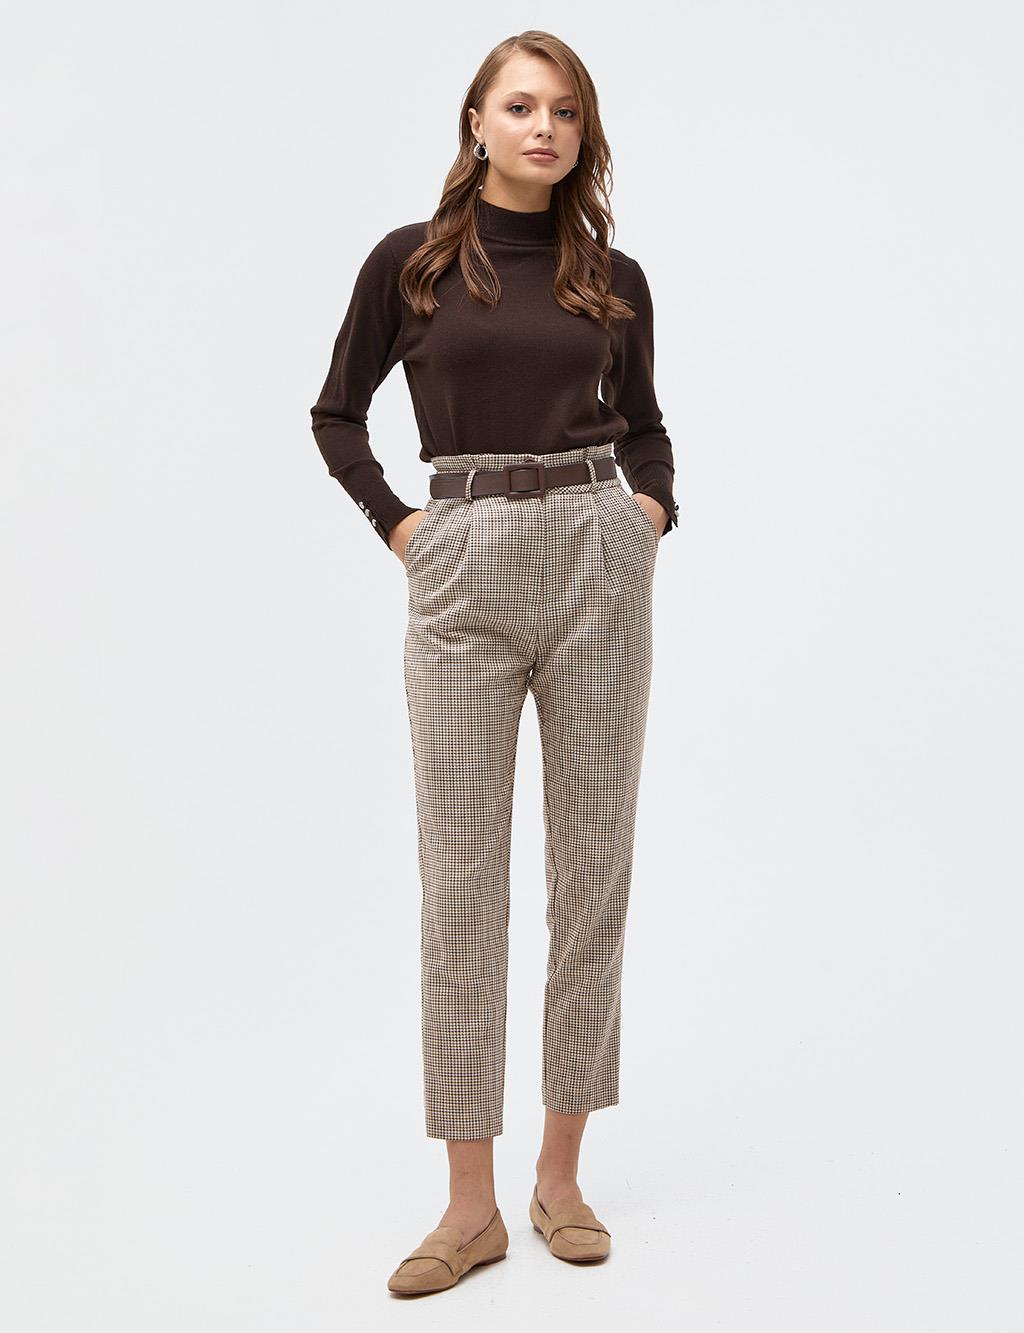 Houndstooth Patterned Pleated Pants Brown-Cream